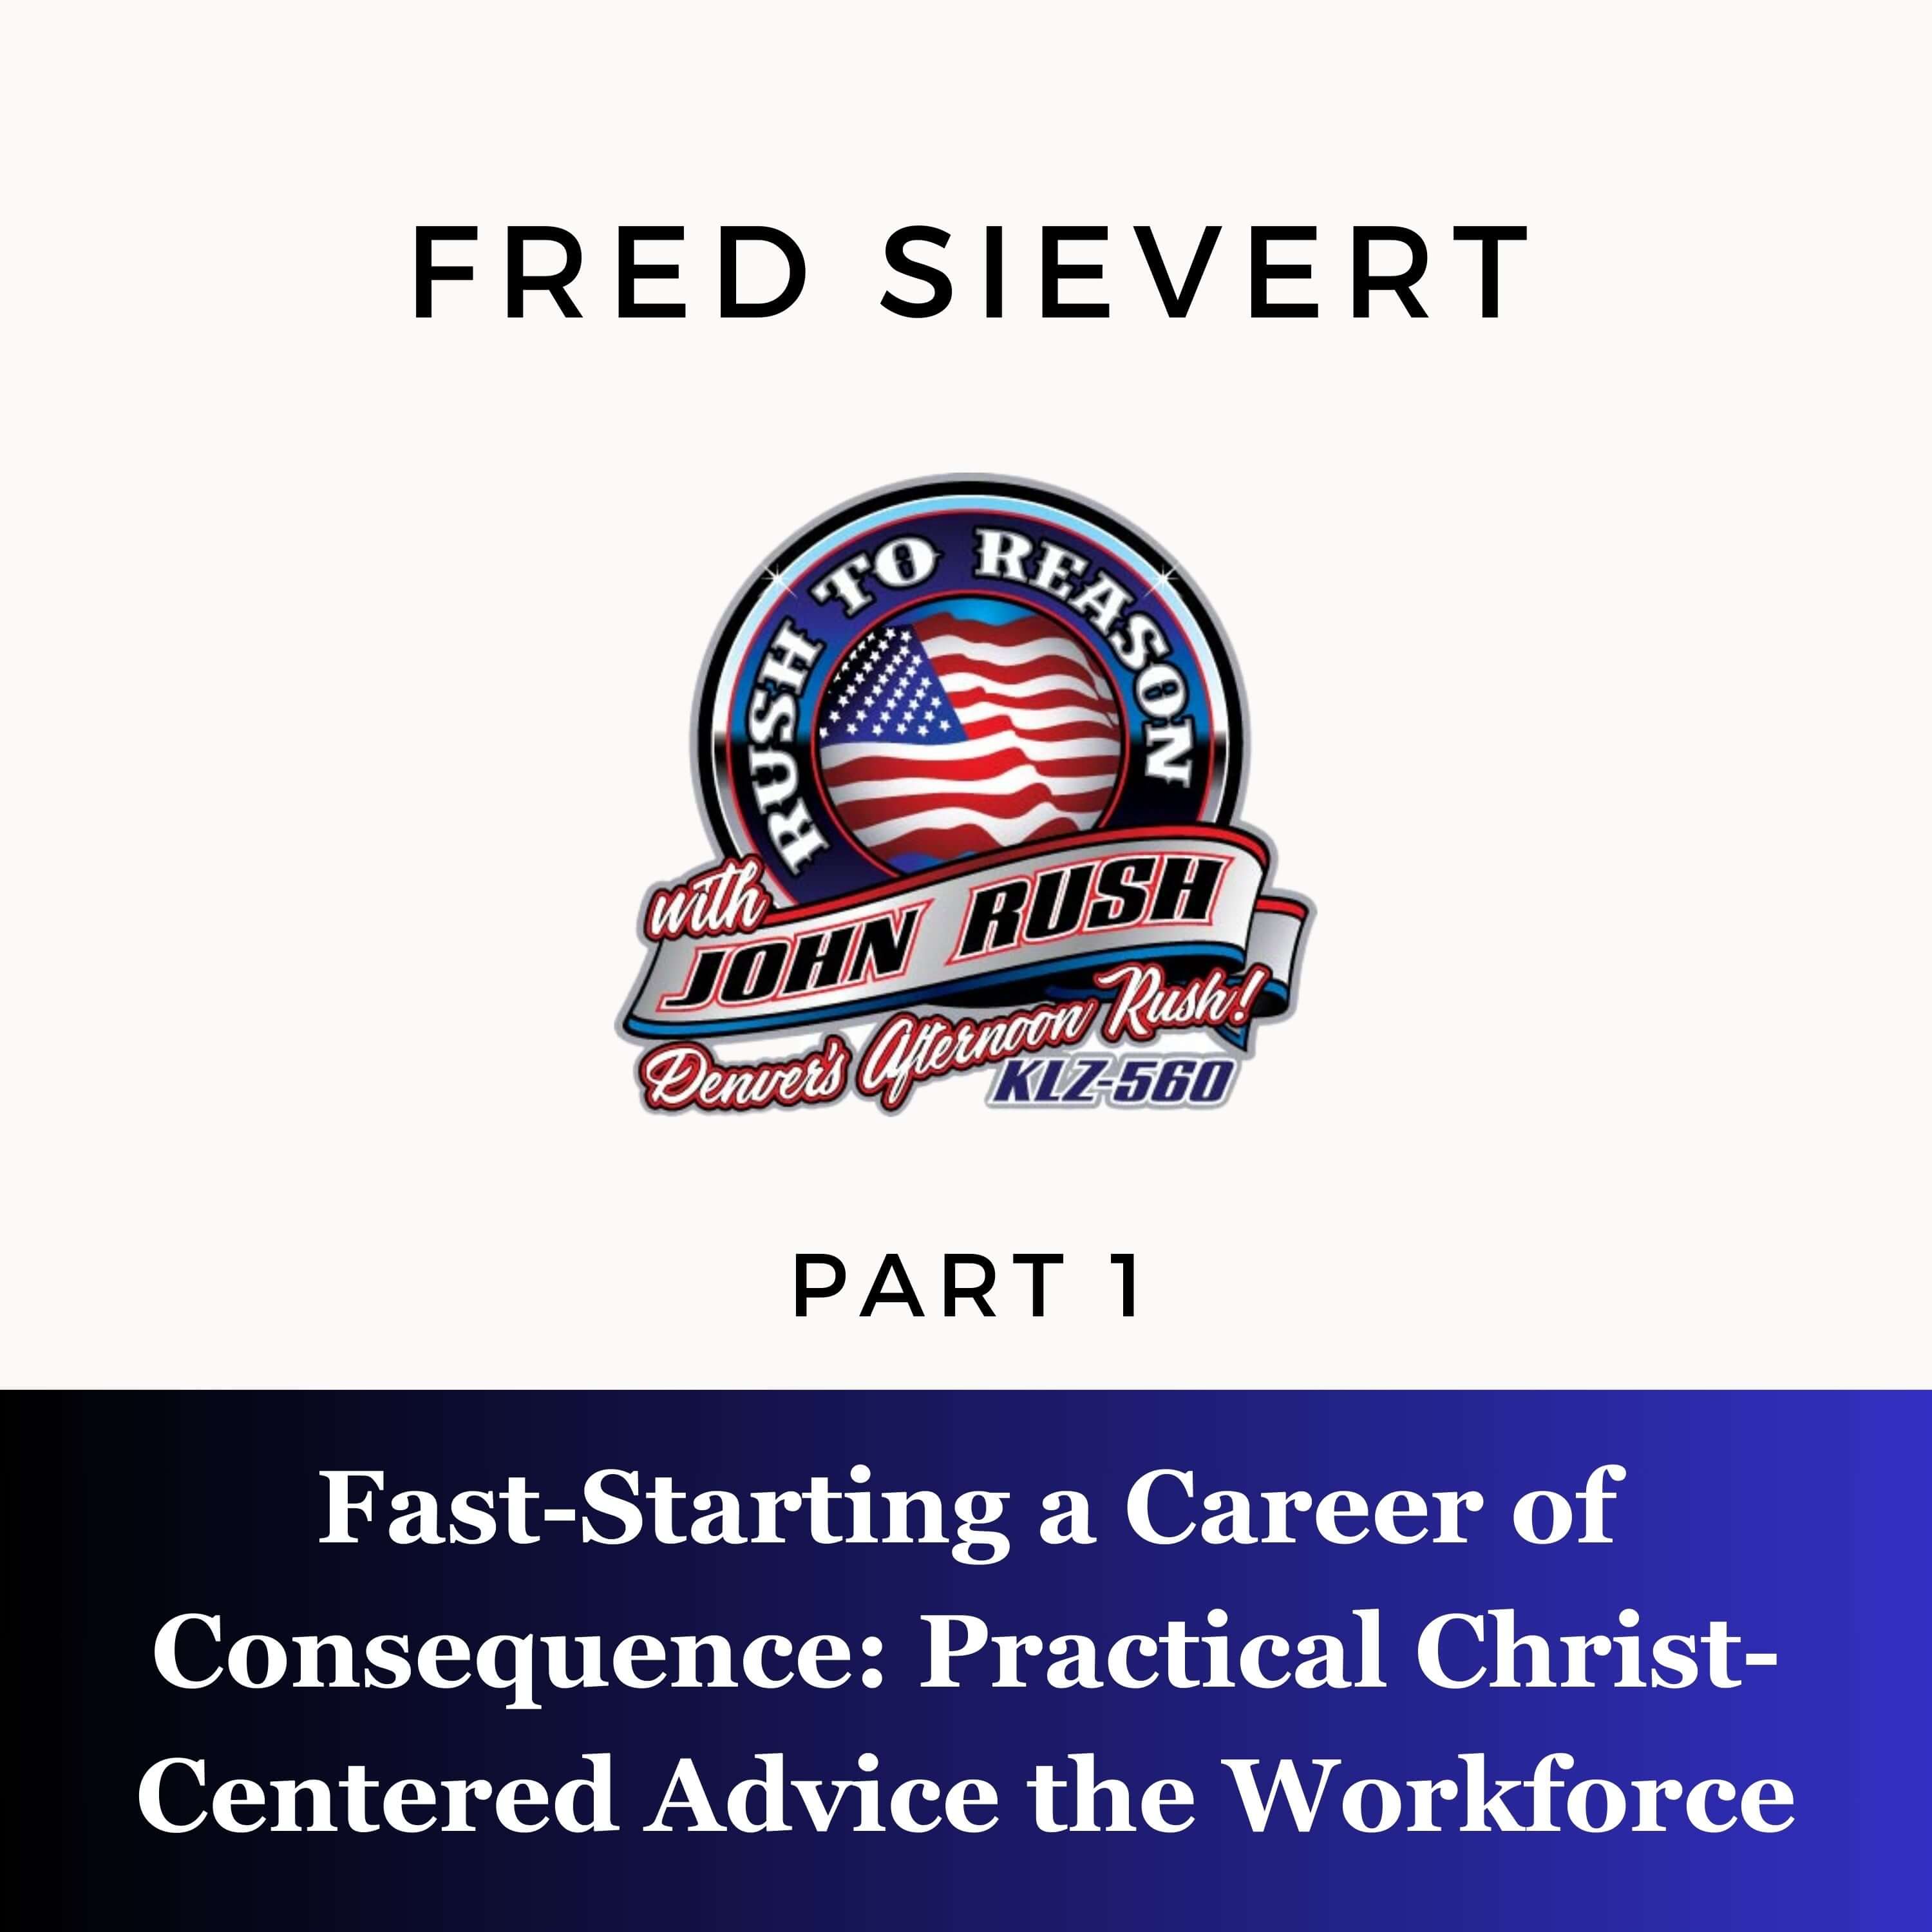 Fast-Starting a Career of Consequence: Practical Christ-Centered Workforce Advice